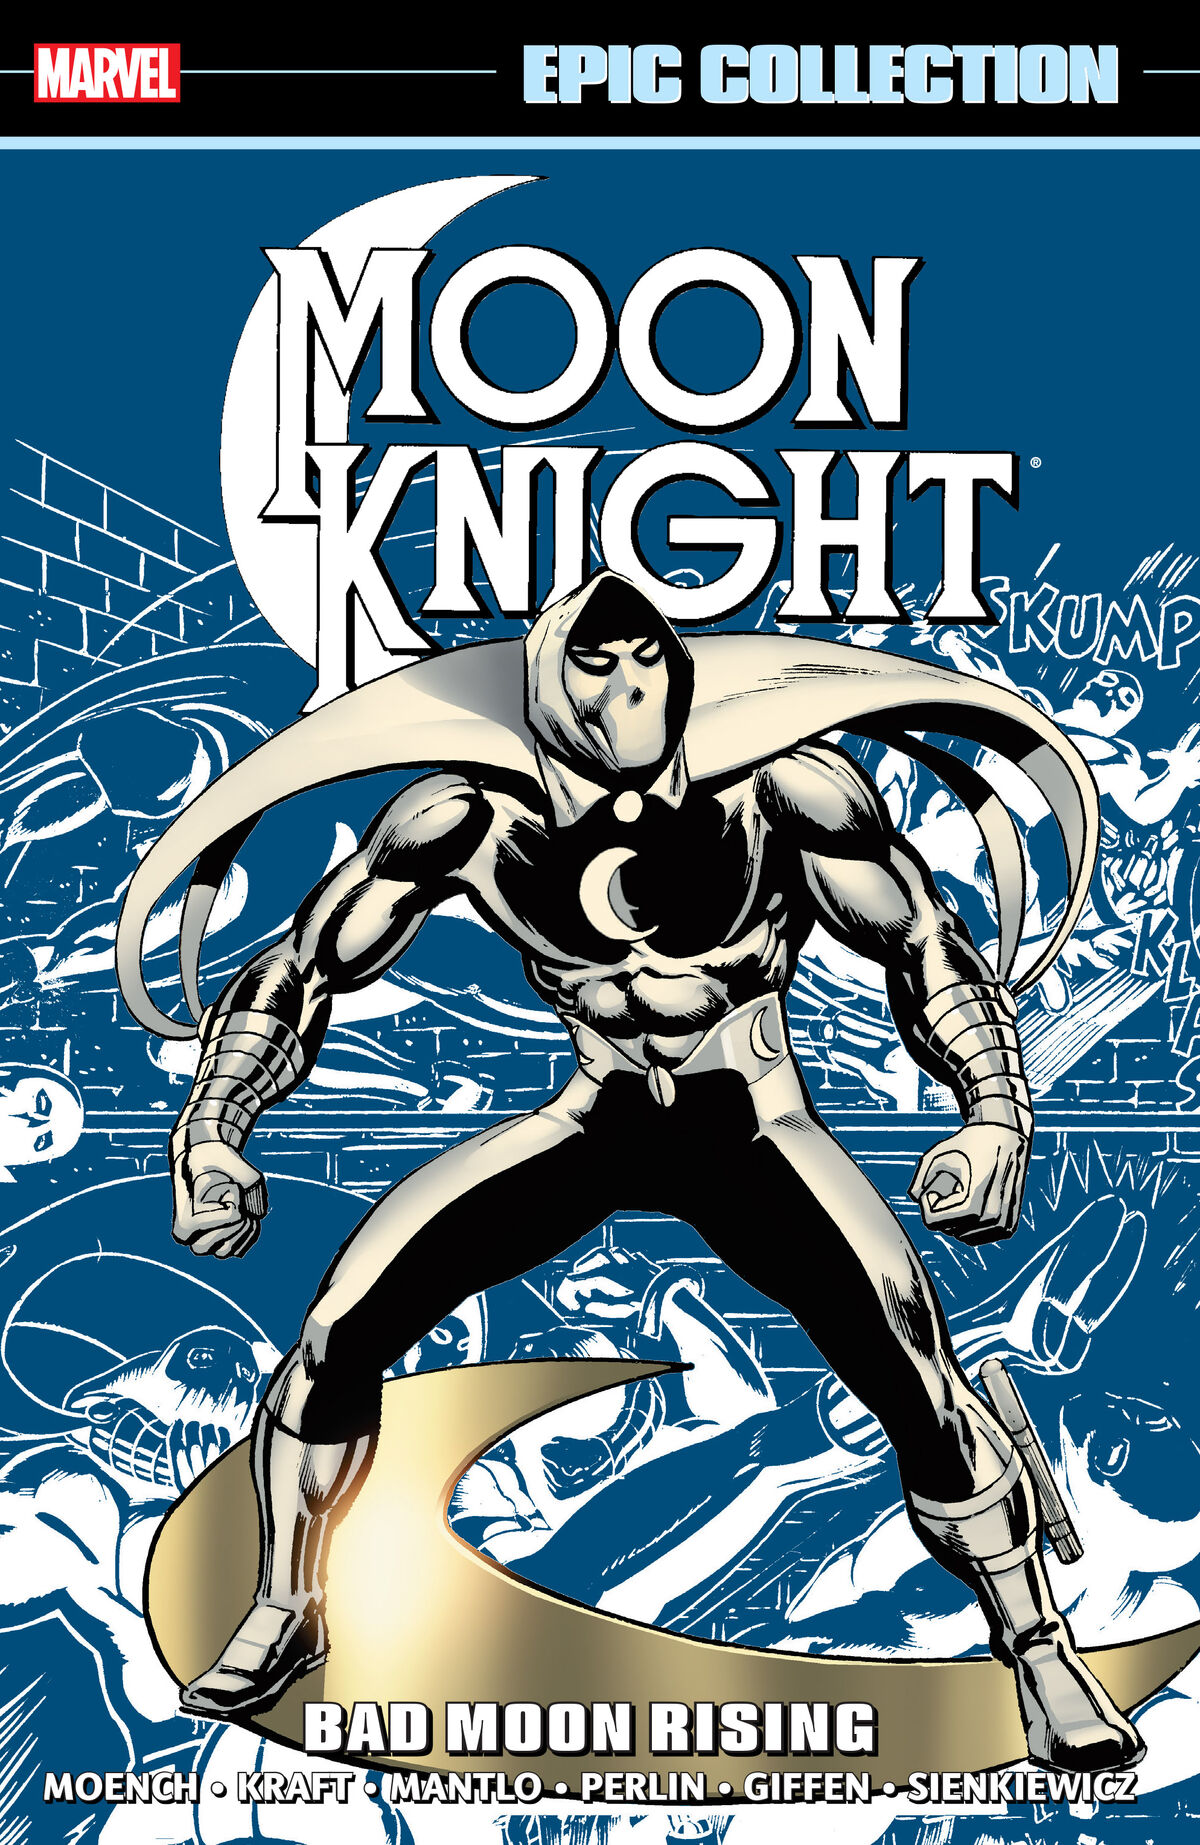 What You Need to Know Before Seeing Marvel's 'Moon Knight' - The Ringer